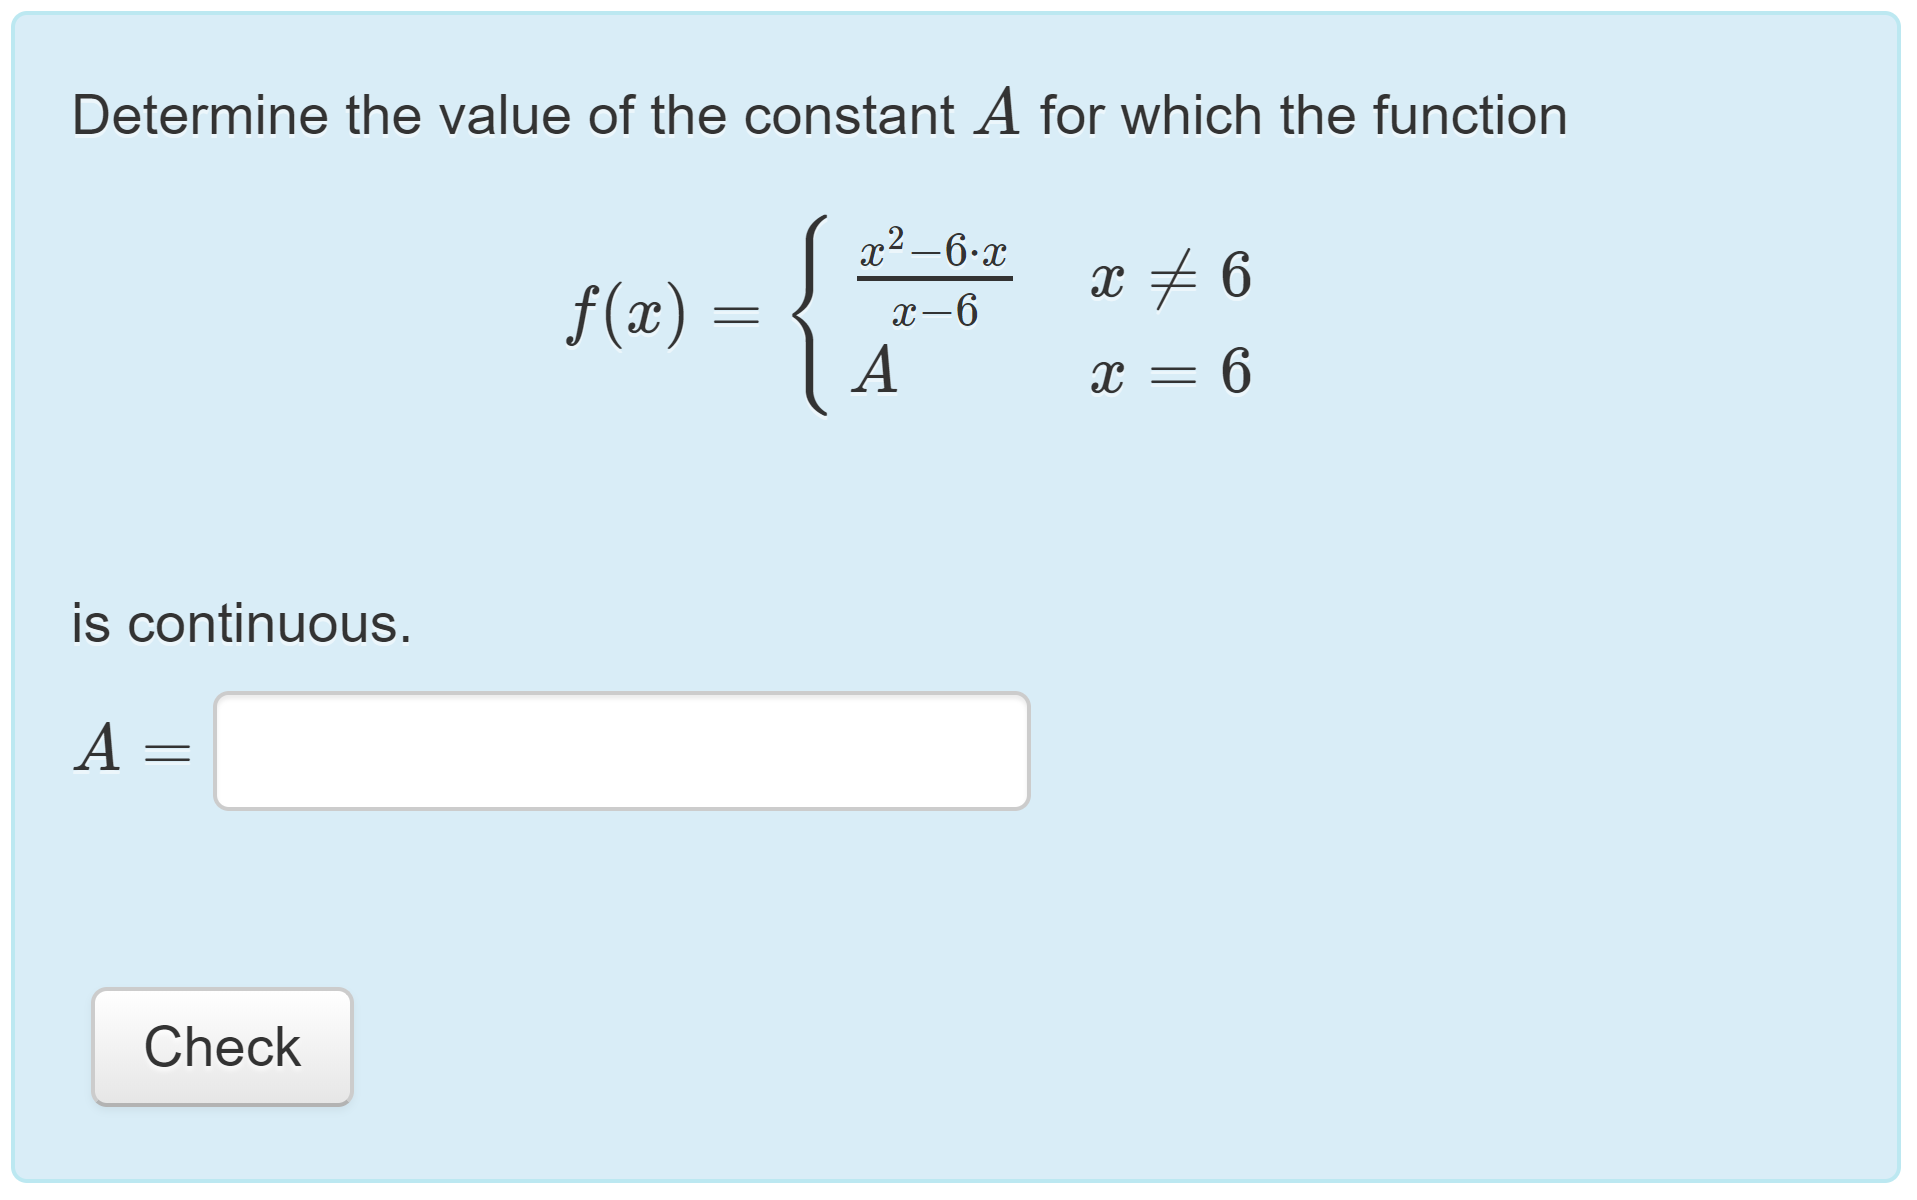 A STACK question from 'Calculus I' involving continuity and L'Hôpital's rule.